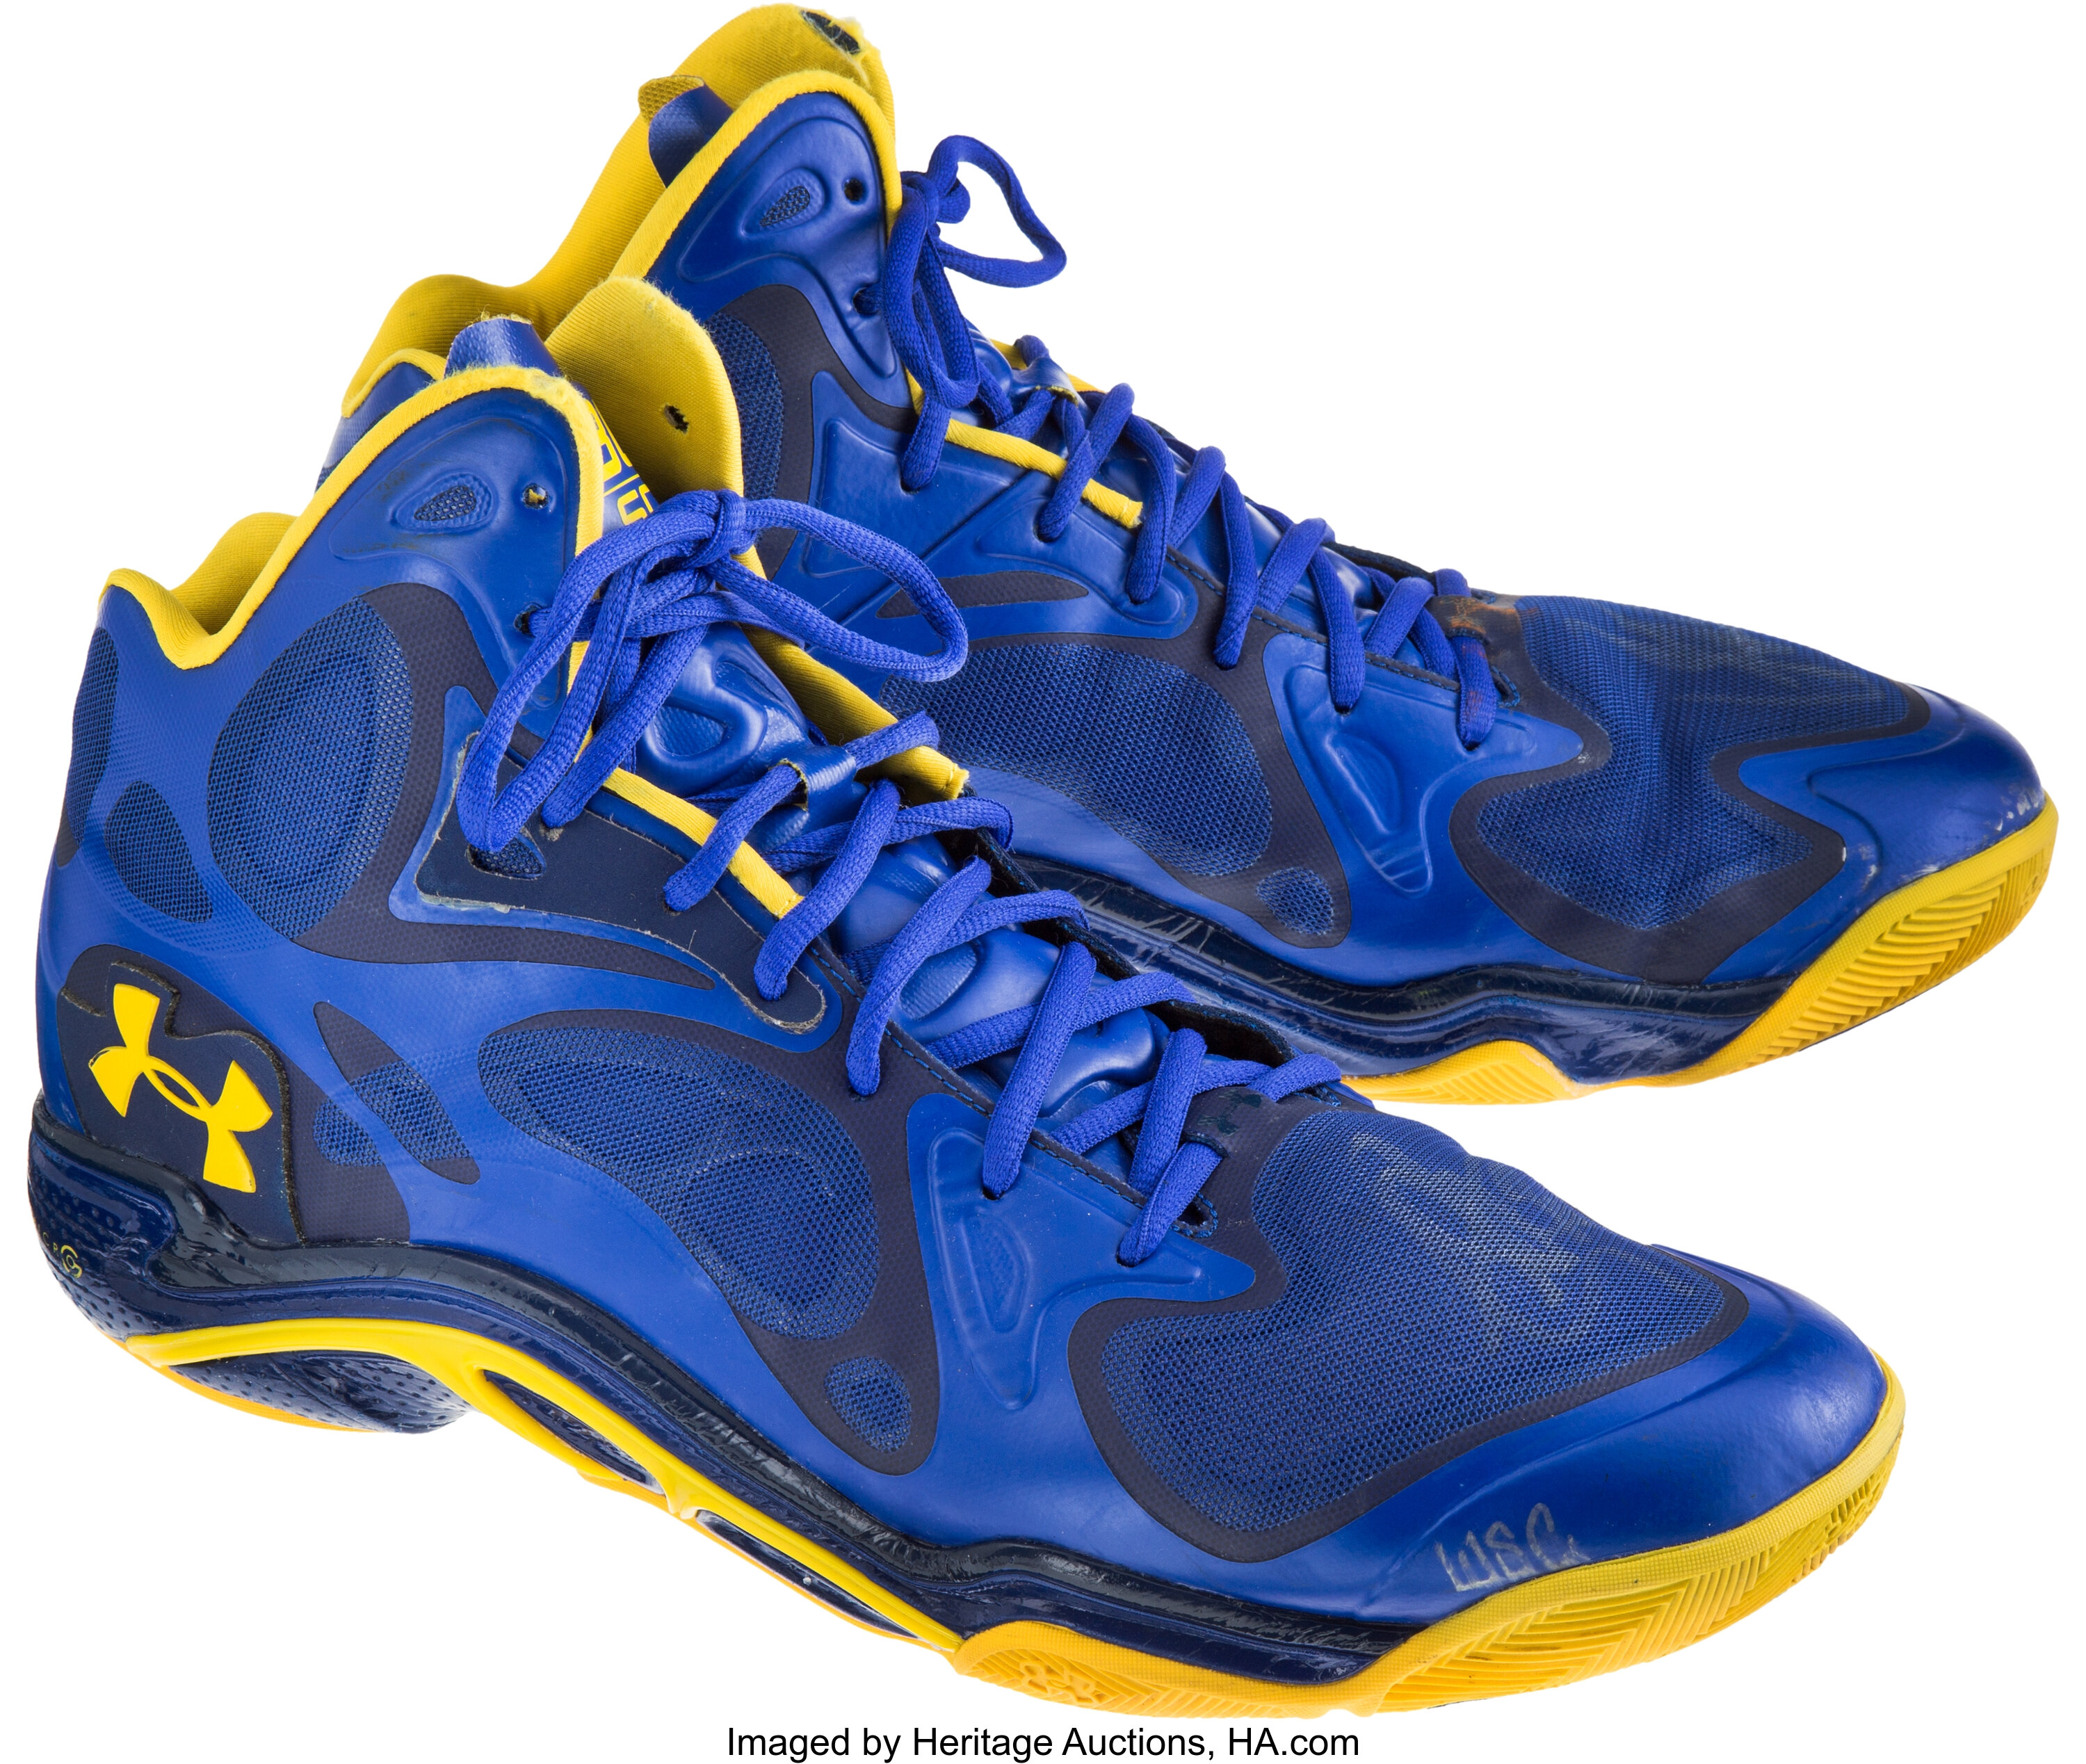 2013-14 Stephen Curry Game Worn, Signed Shoes | Lot #13615 Heritage Auctions